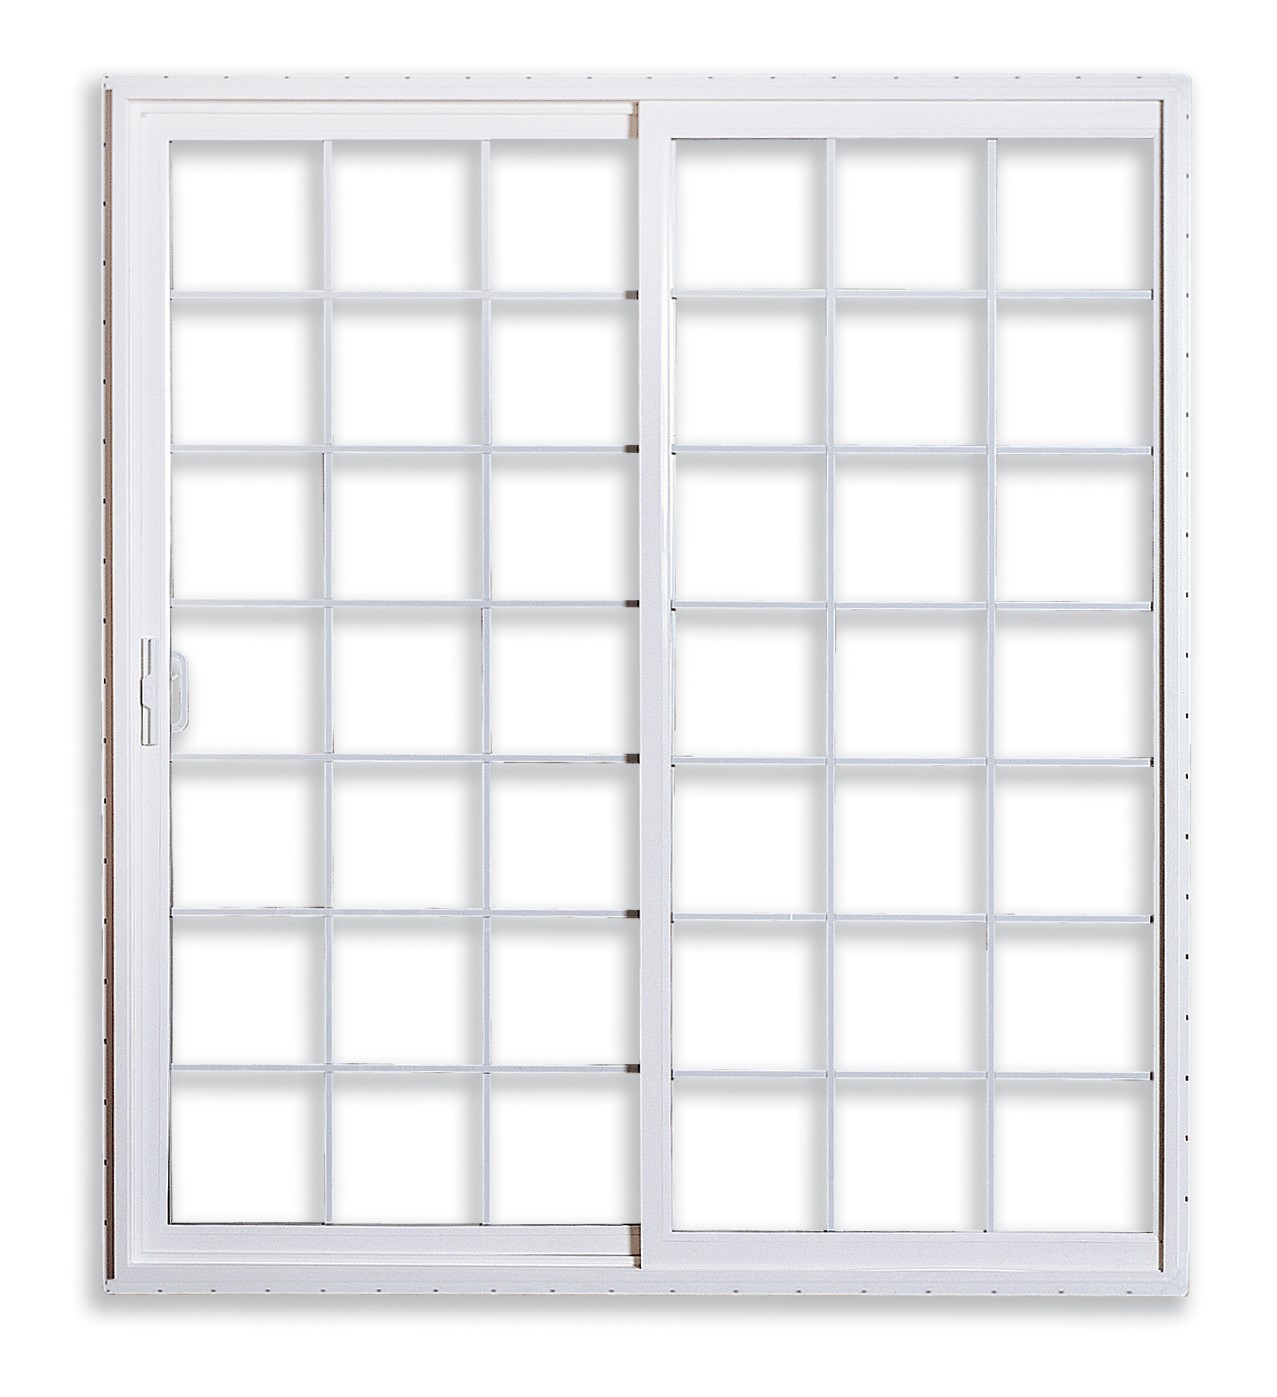 Gentek A170 Sliding Patio Door in White with grids